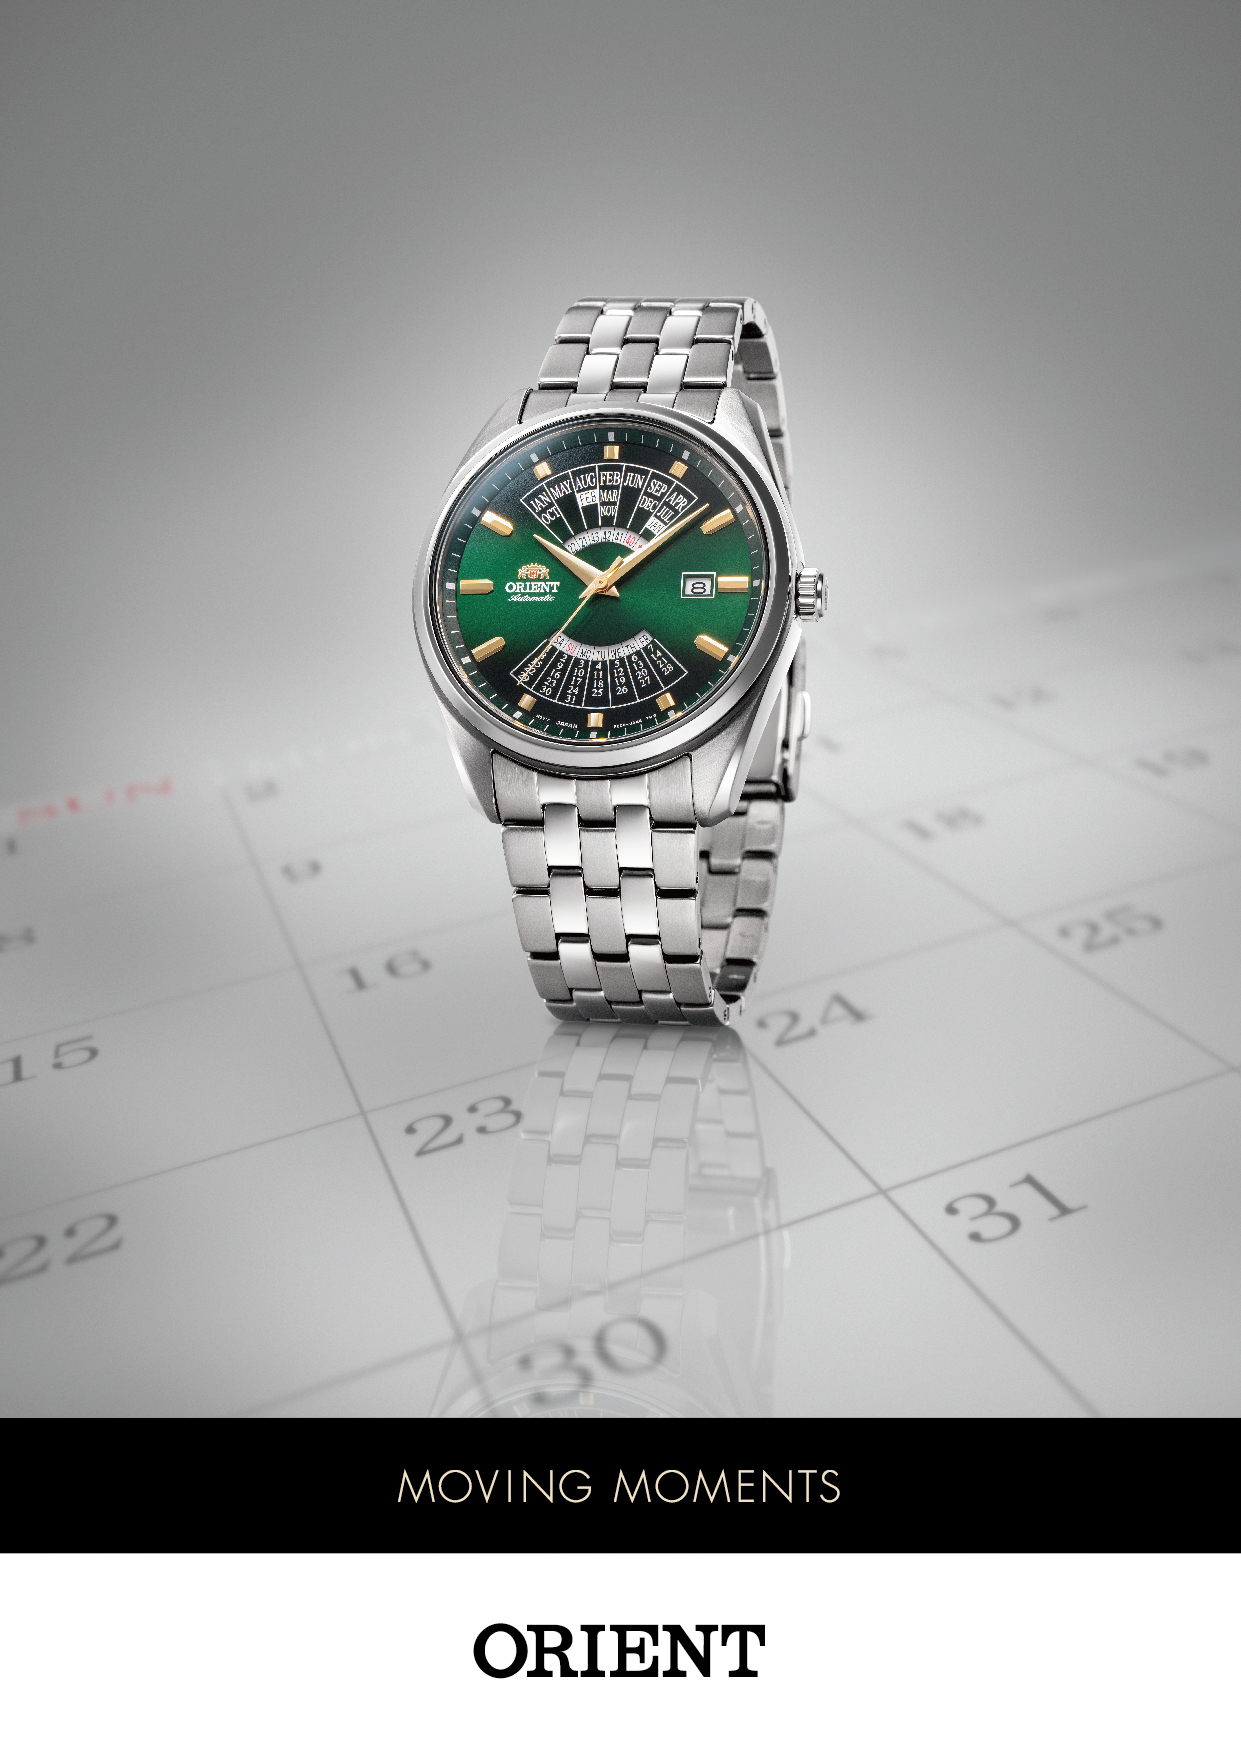 ORIENT announces a new generation of the long-time popular Multi Year Calendar model with refined functionality and aesthetics